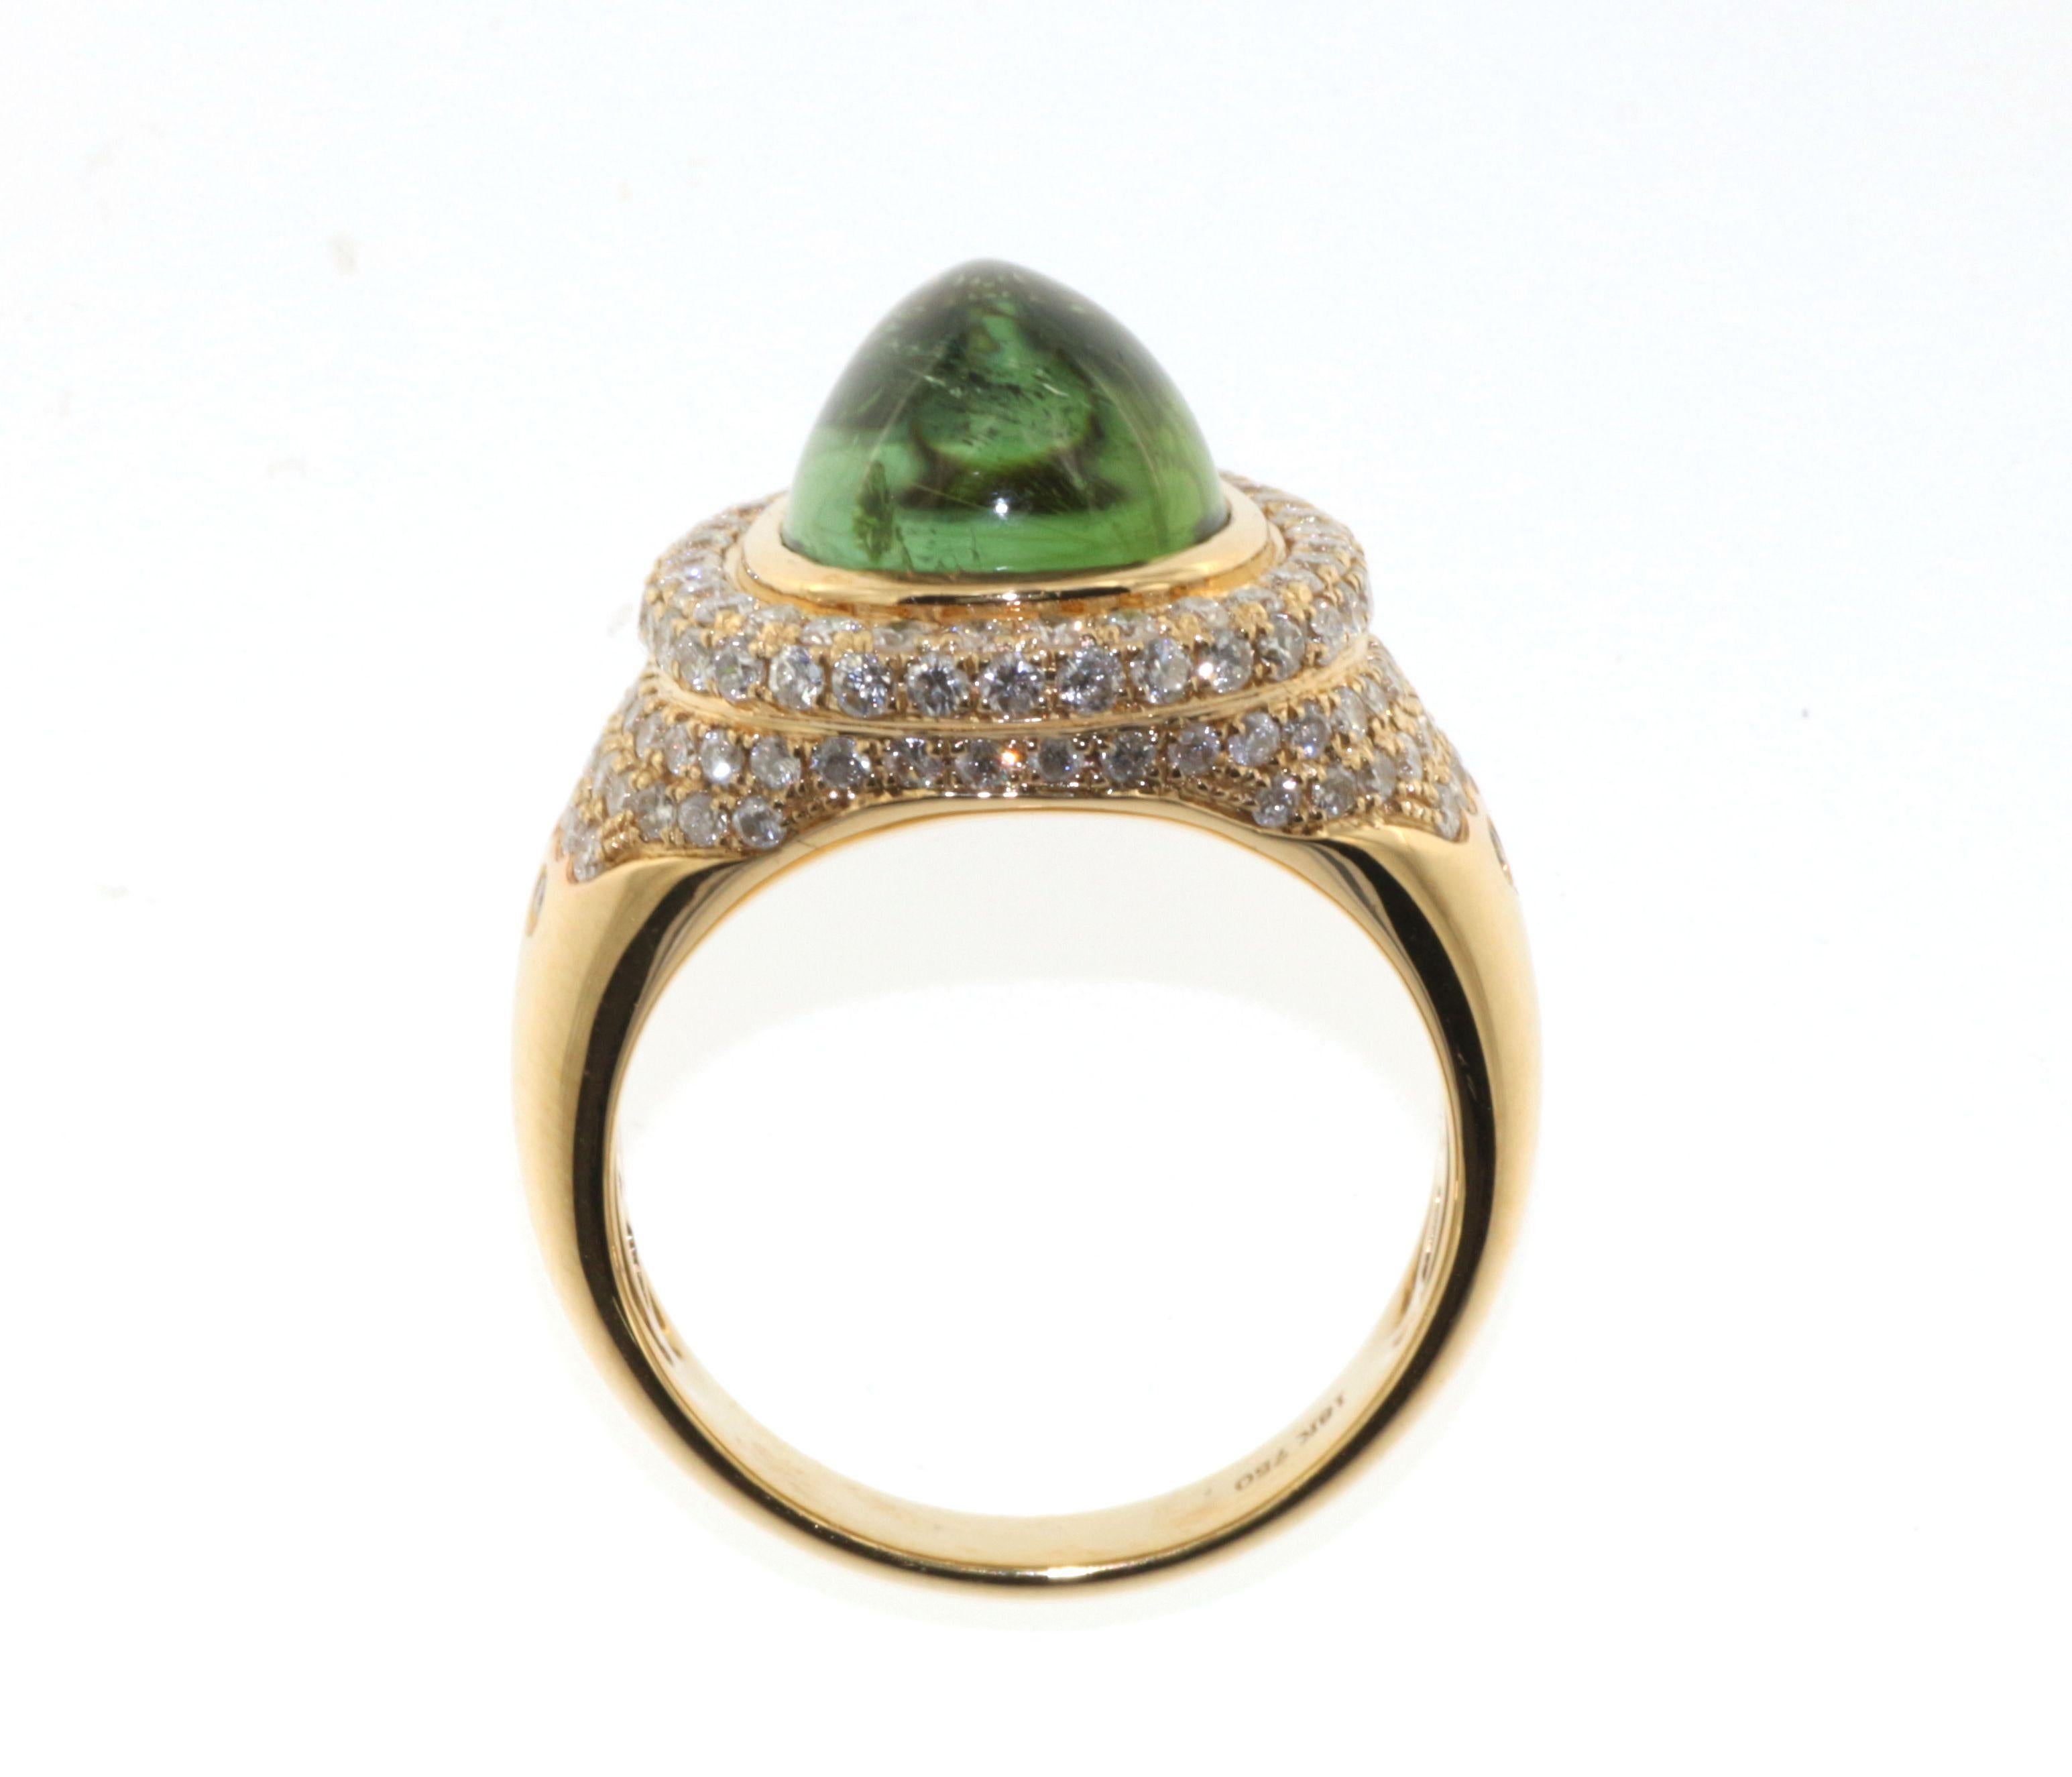 Vintage 7ct. Green Tourmaline Diamond Cocktail Ring in 18 Karat Yellow Gold In New Condition For Sale In Hong Kong, HK